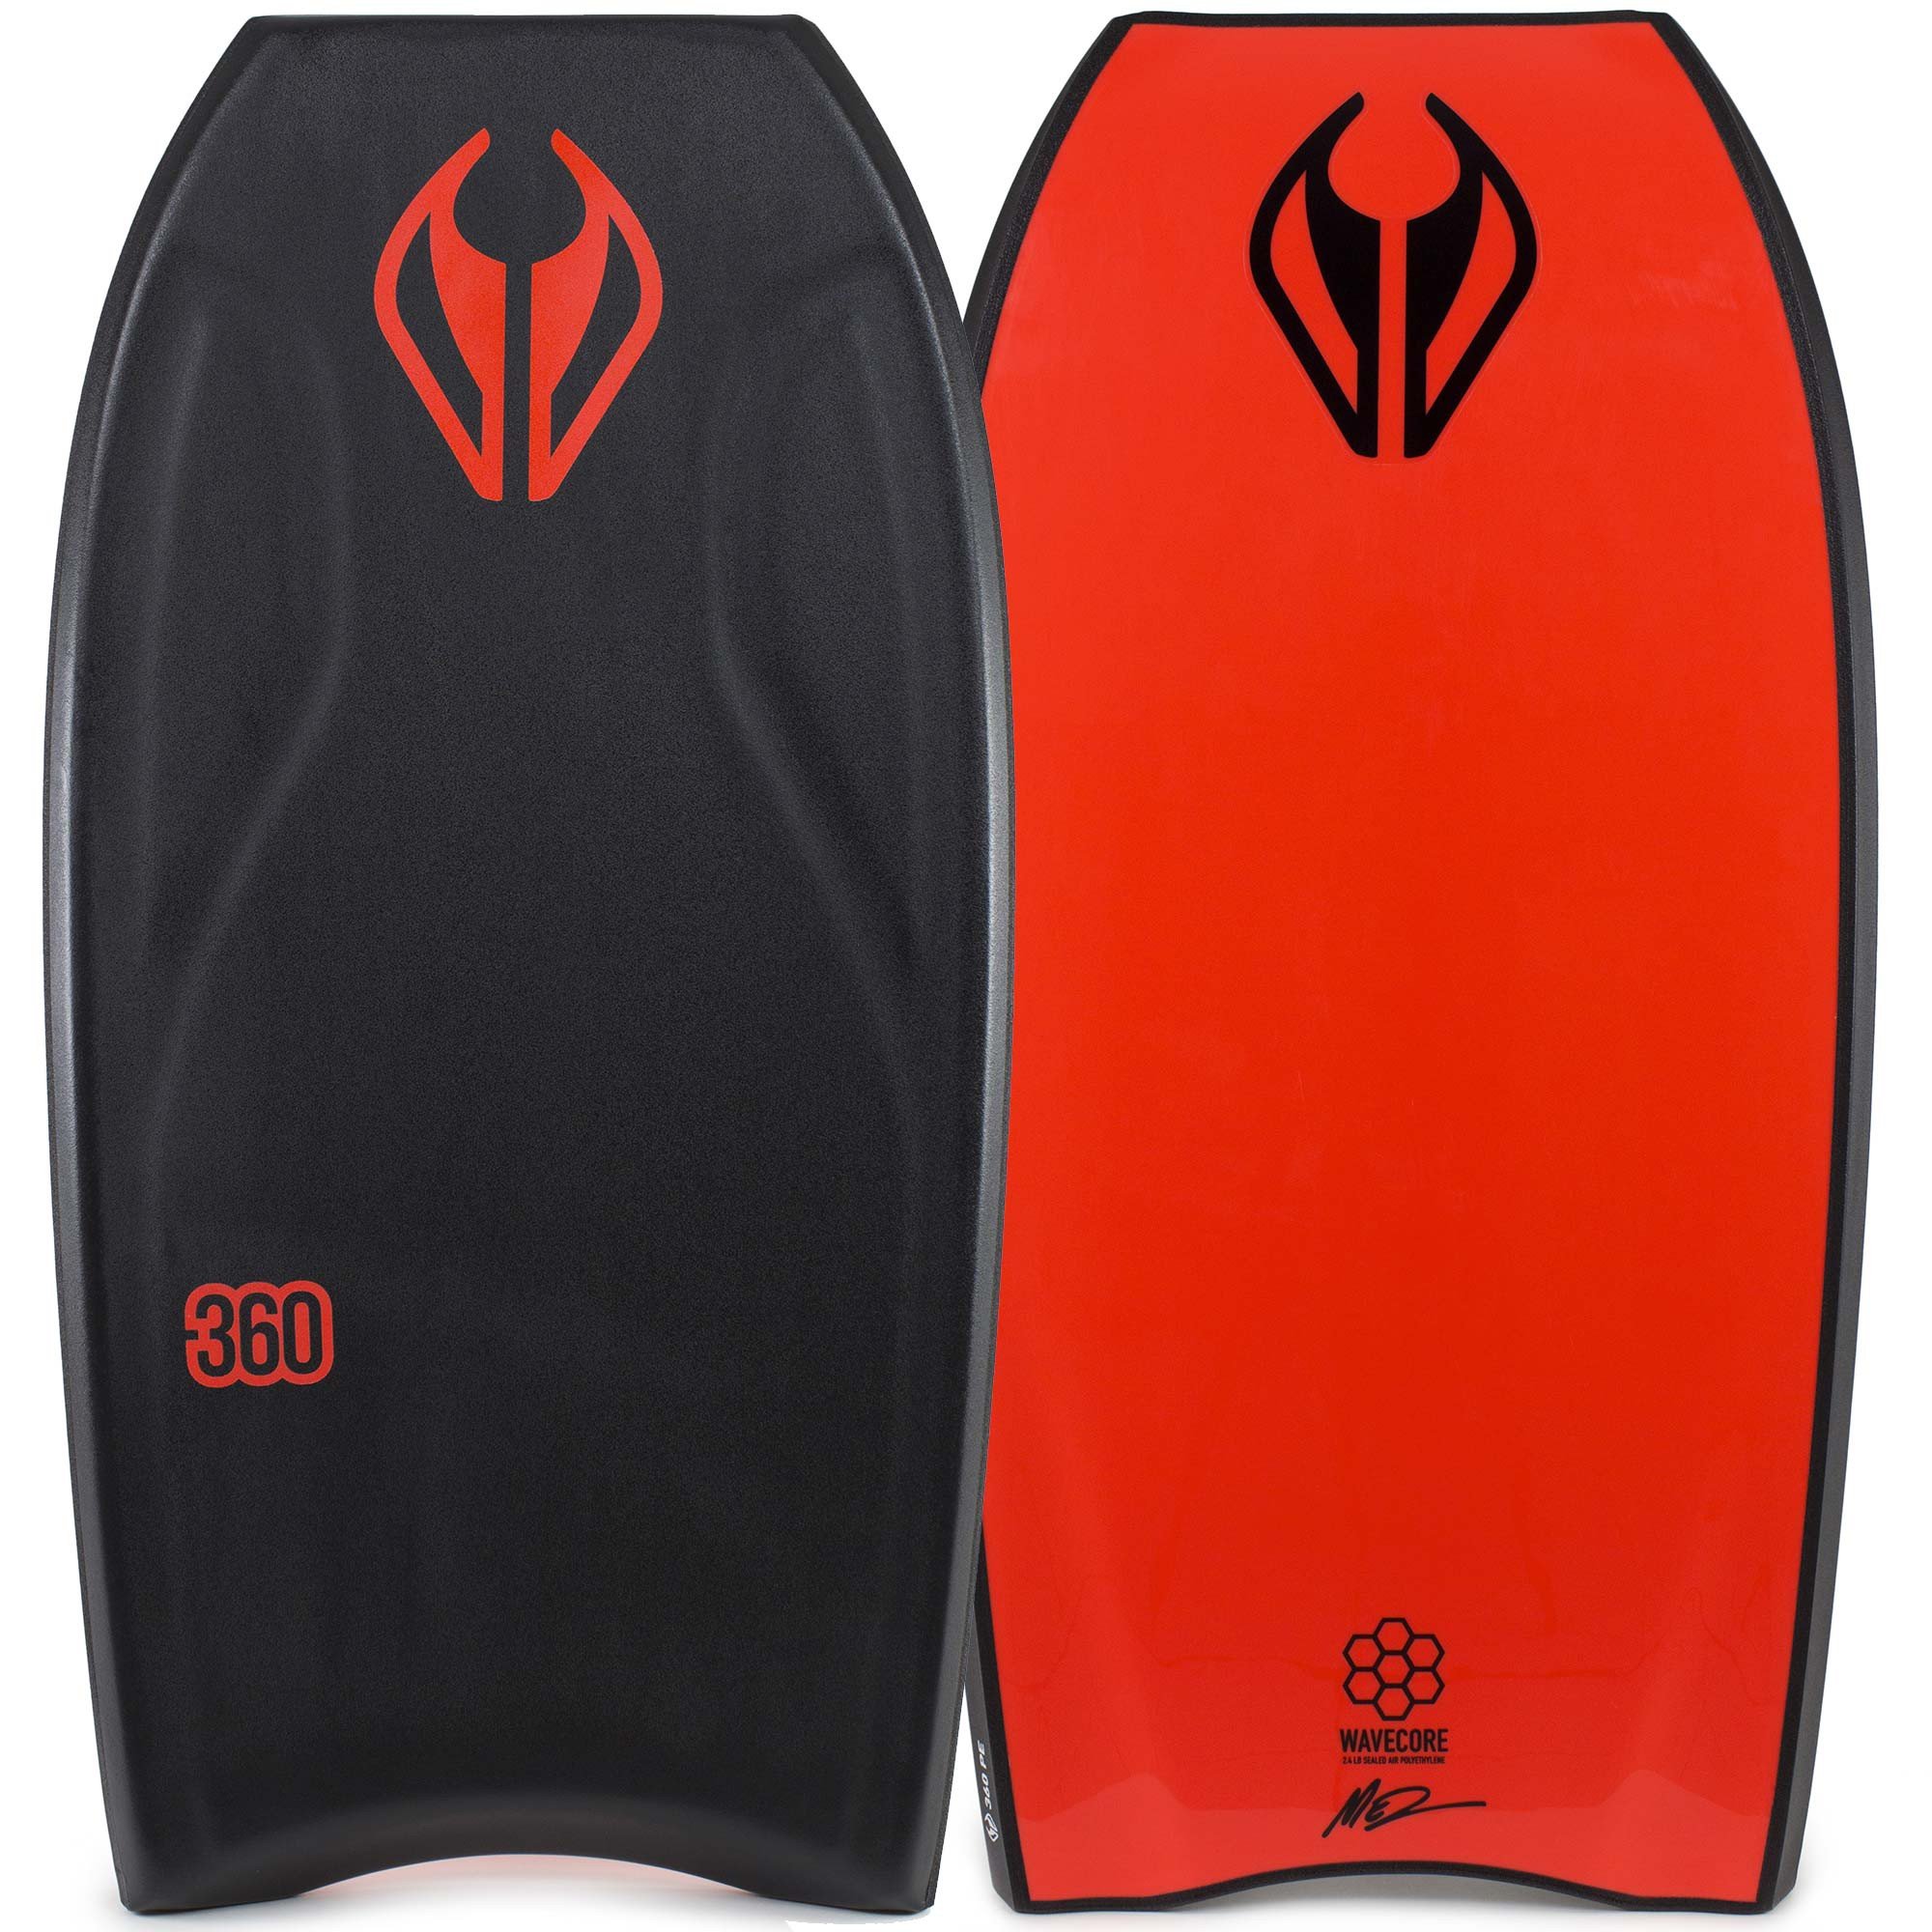 nmd 360 bodyboard review